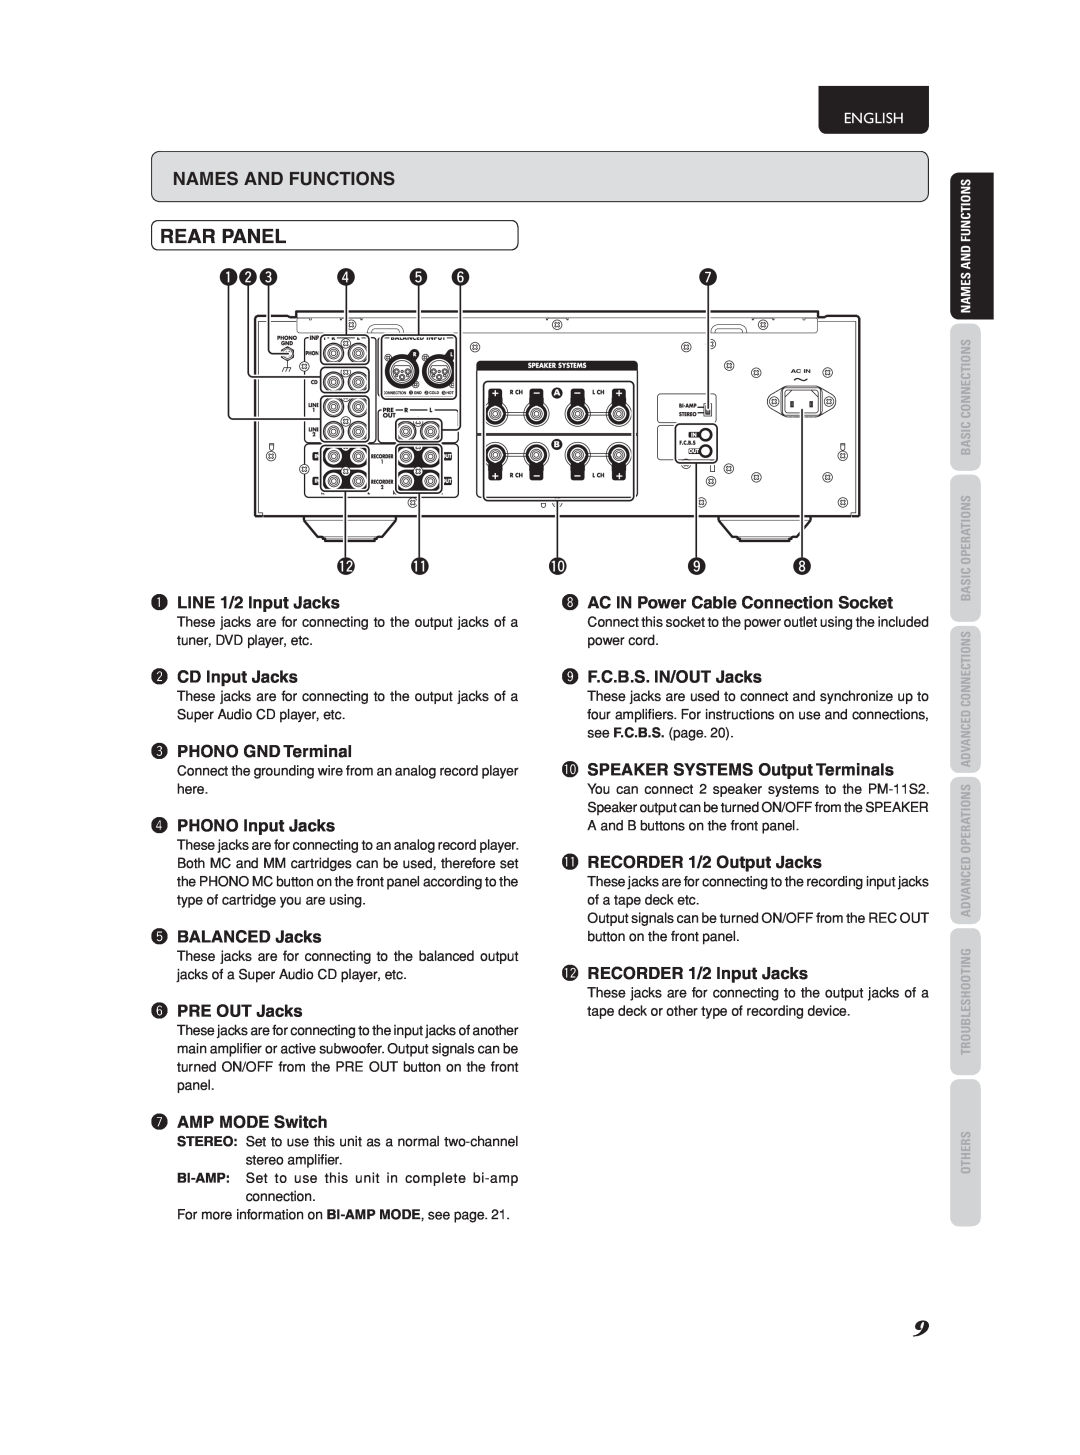 Marantz PM-11S2 manual Rear Panel, Names And Functions, r t y 